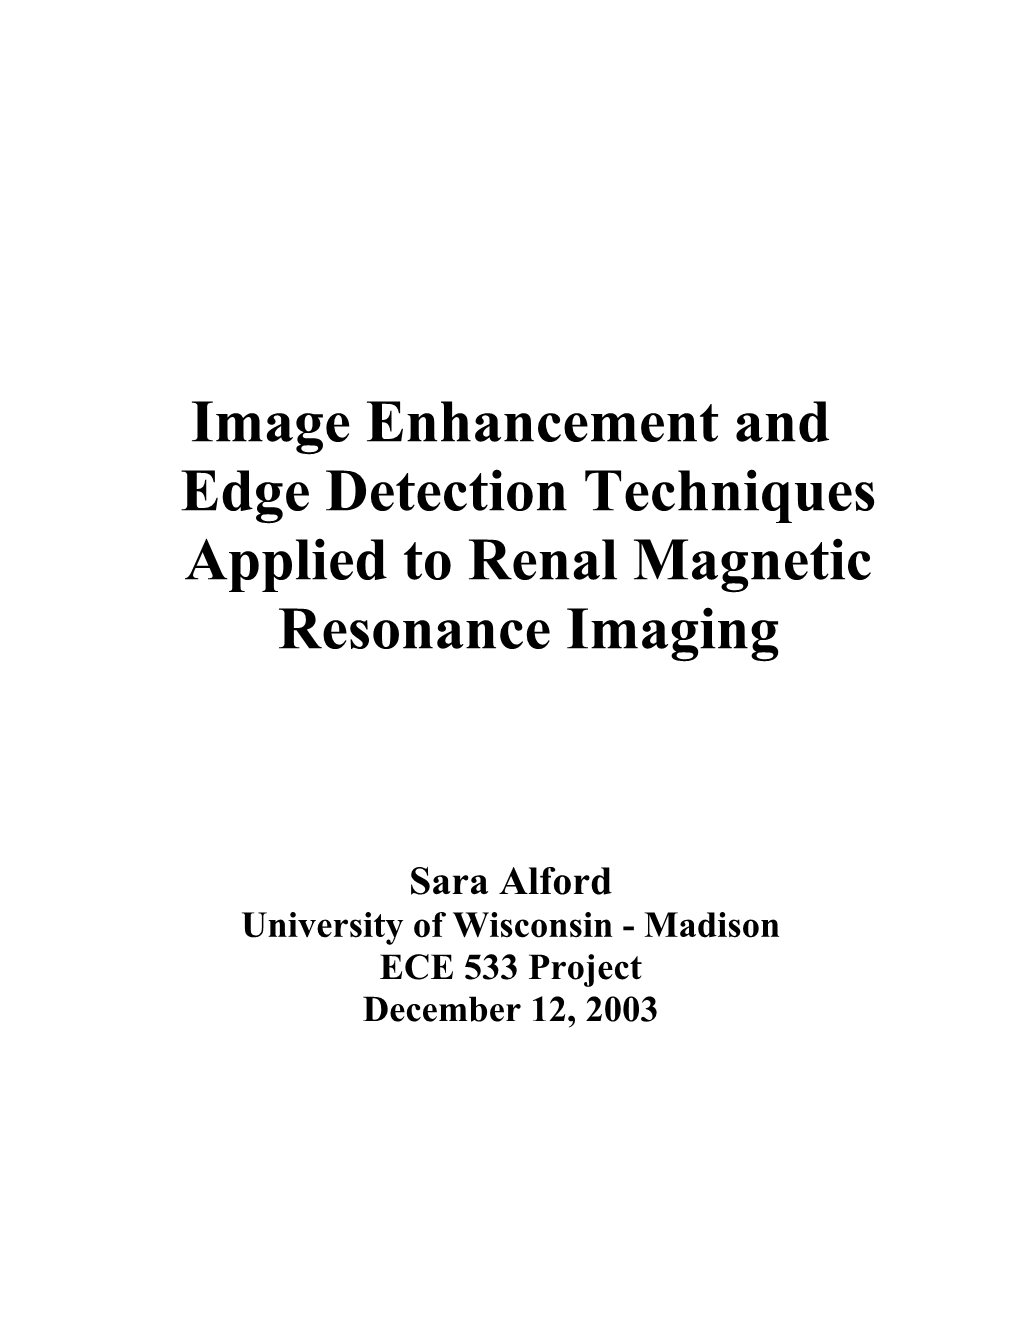 Image Enhancement Techniques Applied to Renal Magnetic Resonance Imaging